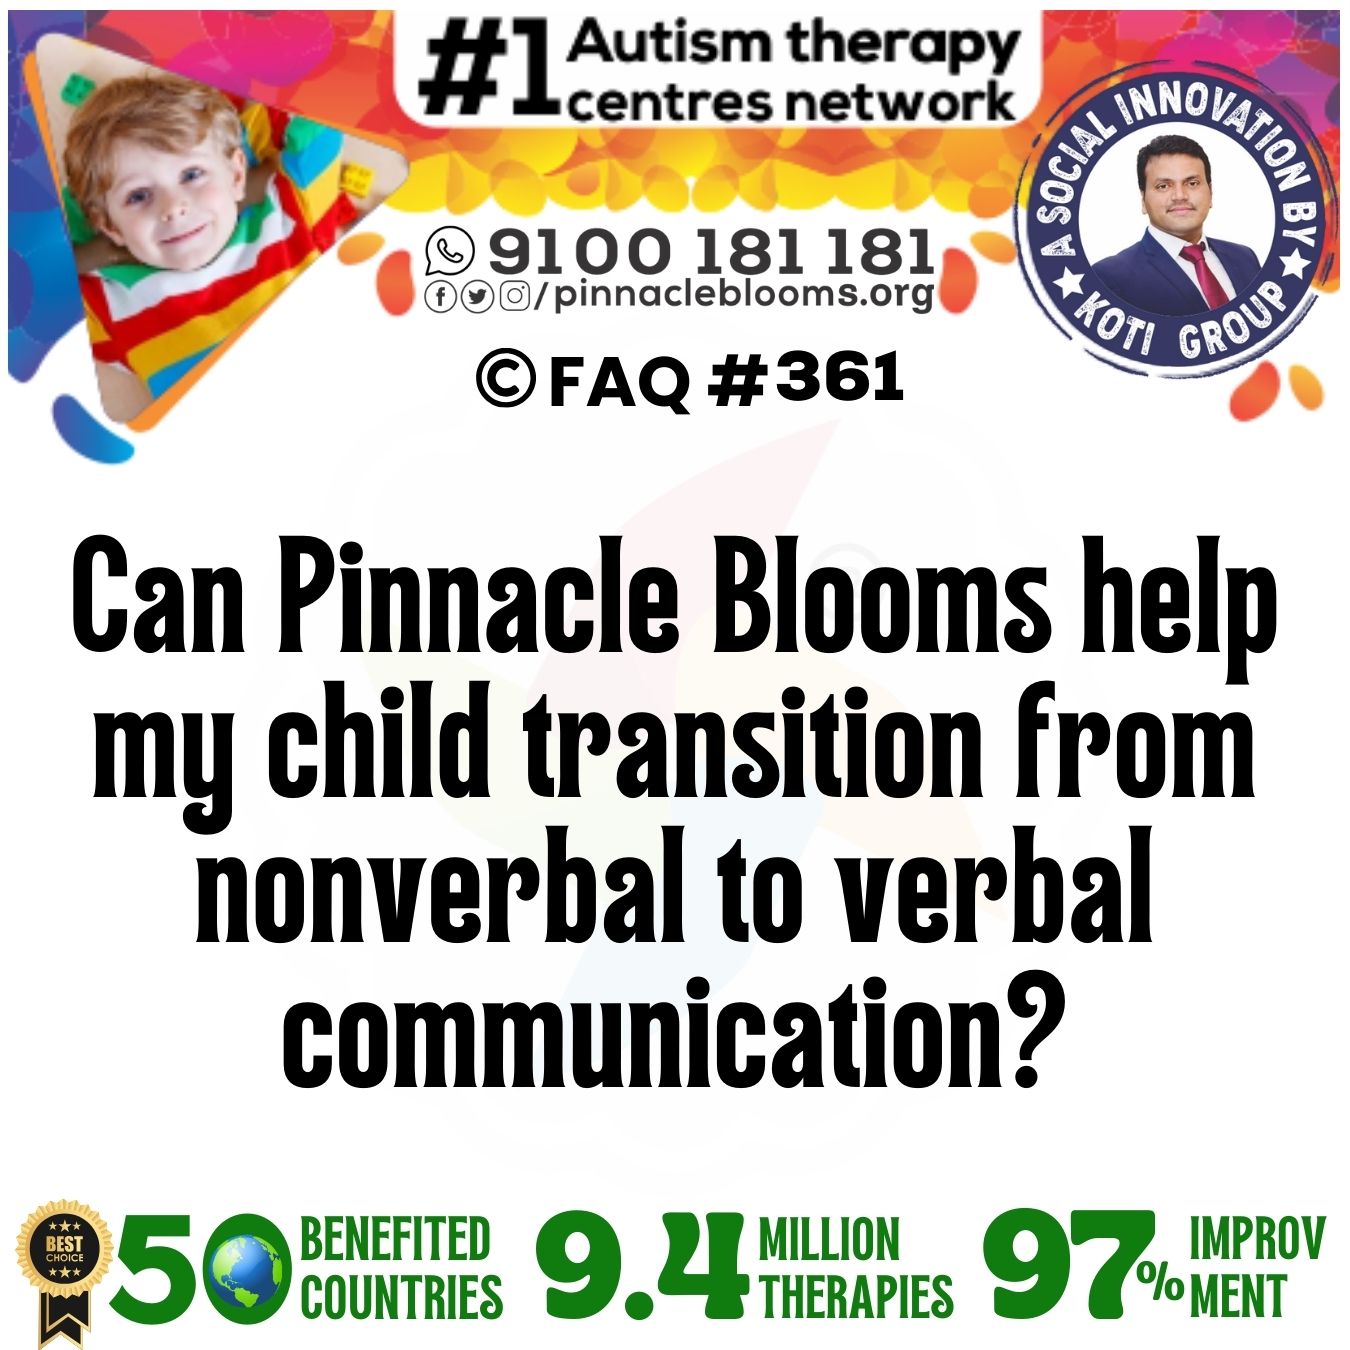 Can Pinnacle Blooms help my child transition from nonverbal to verbal communication?